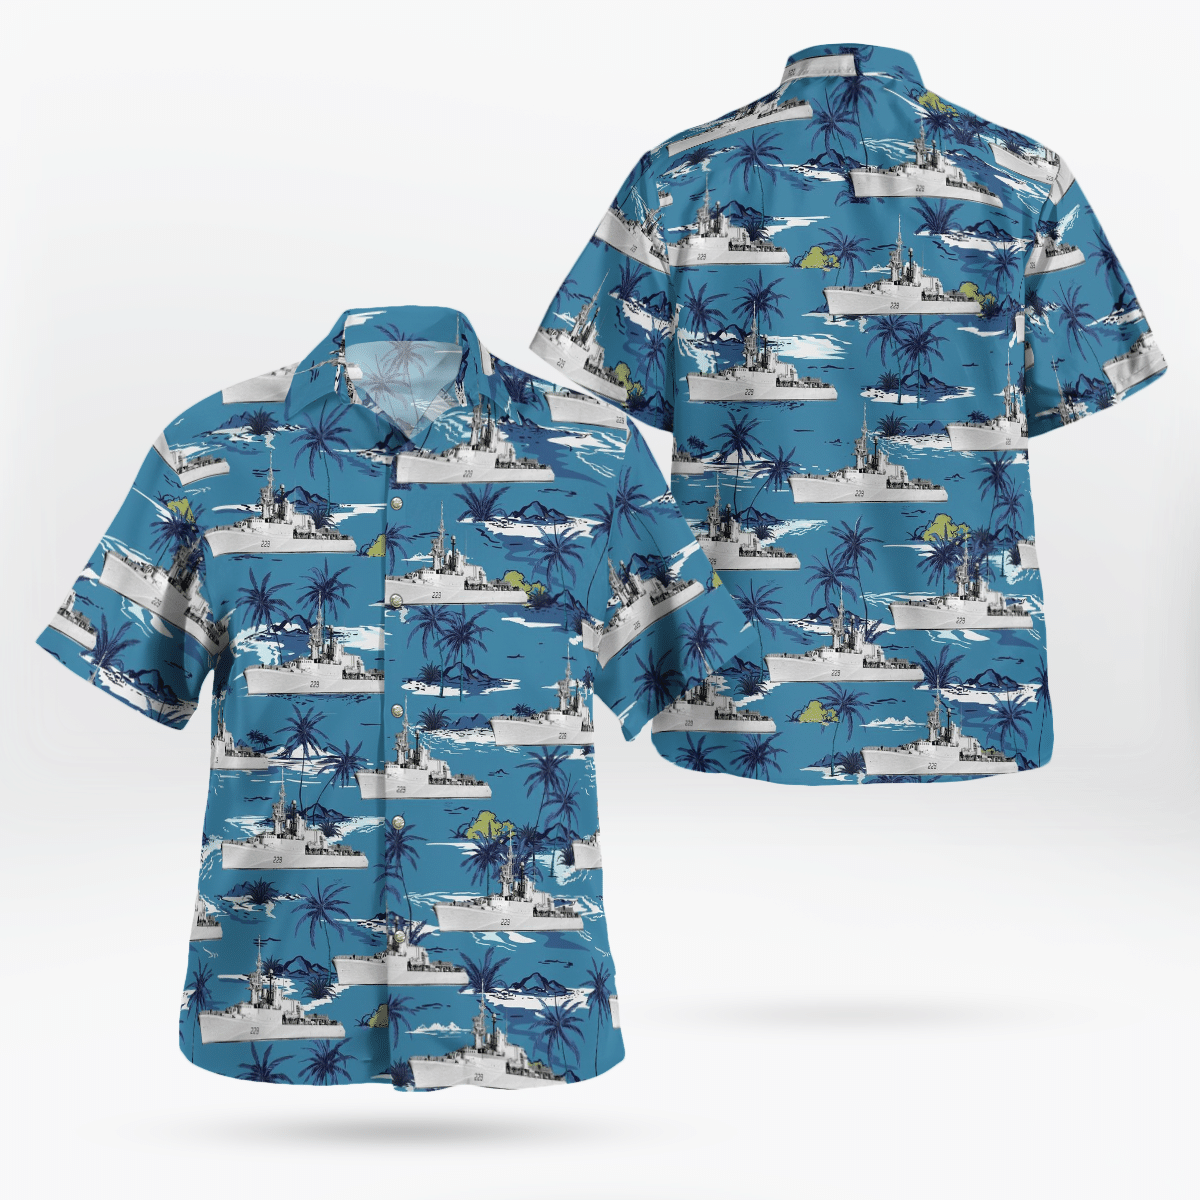 Consider getting these Hawaiian Shirt for your friends 435